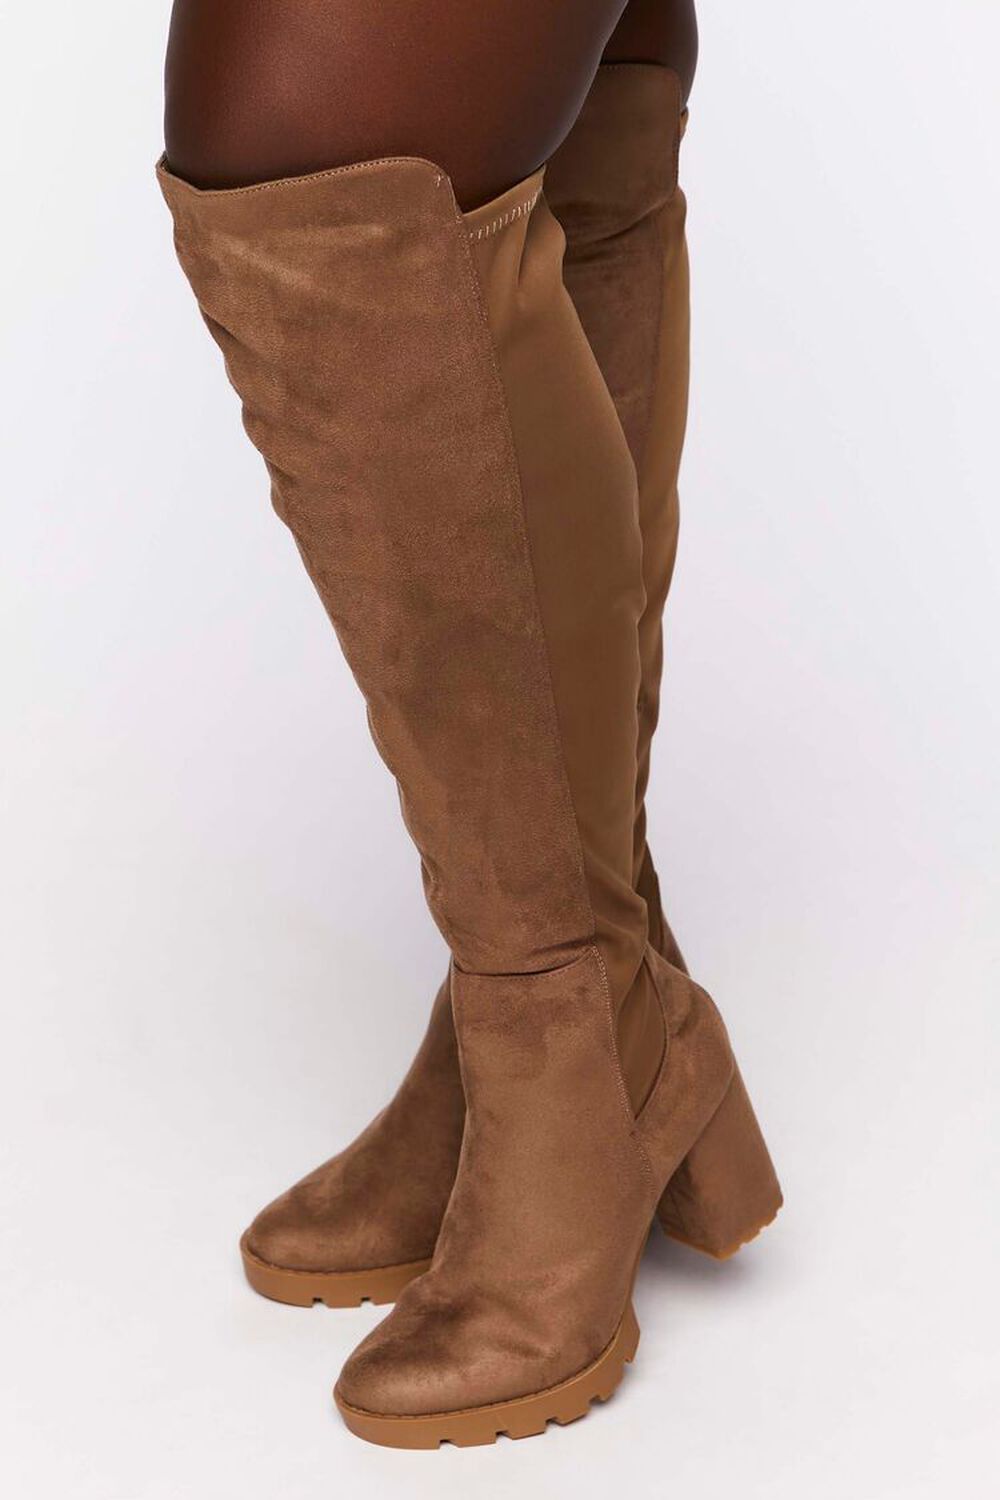 TAUPE Over-the-Knee Lug-Sole Boots (Wide), image 1